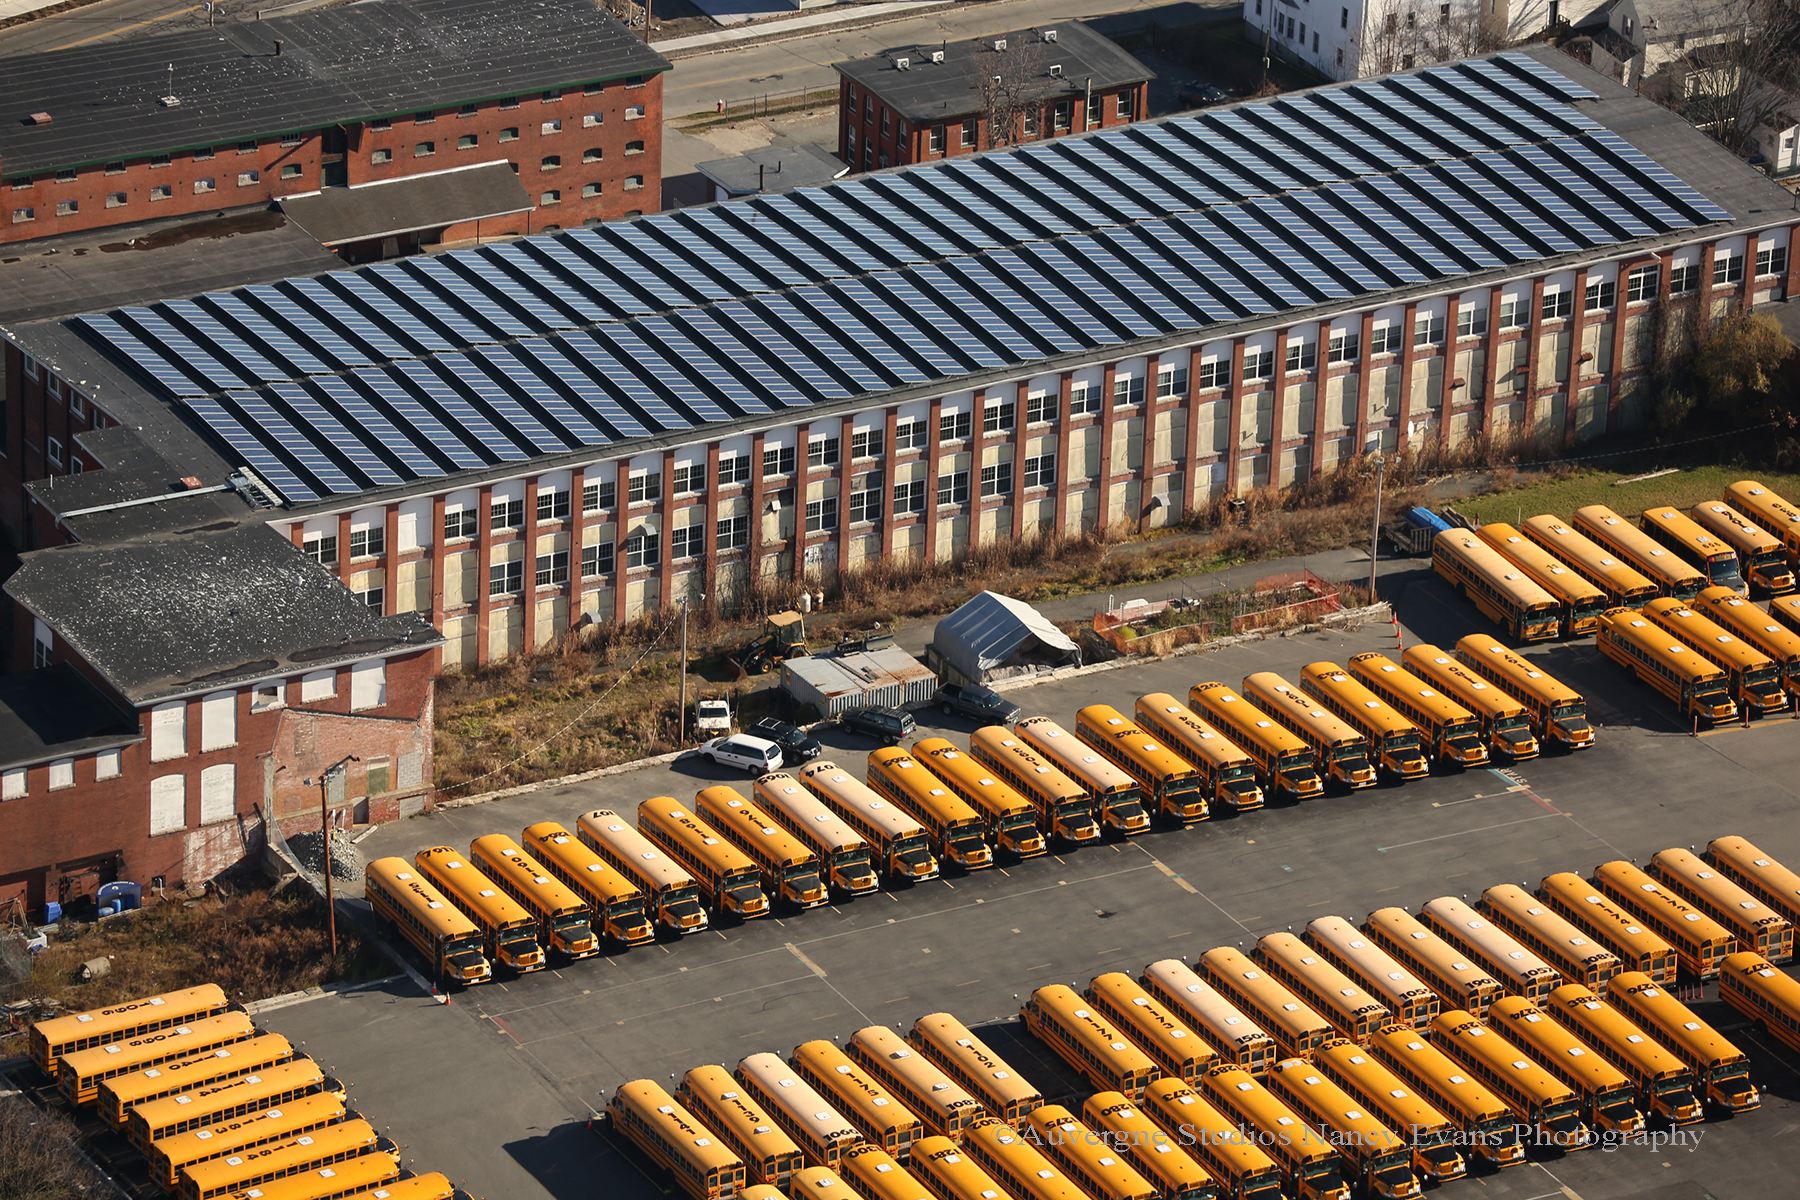 Aerial view of the 1045 solar panels that comprise this 287.375kW 600V system